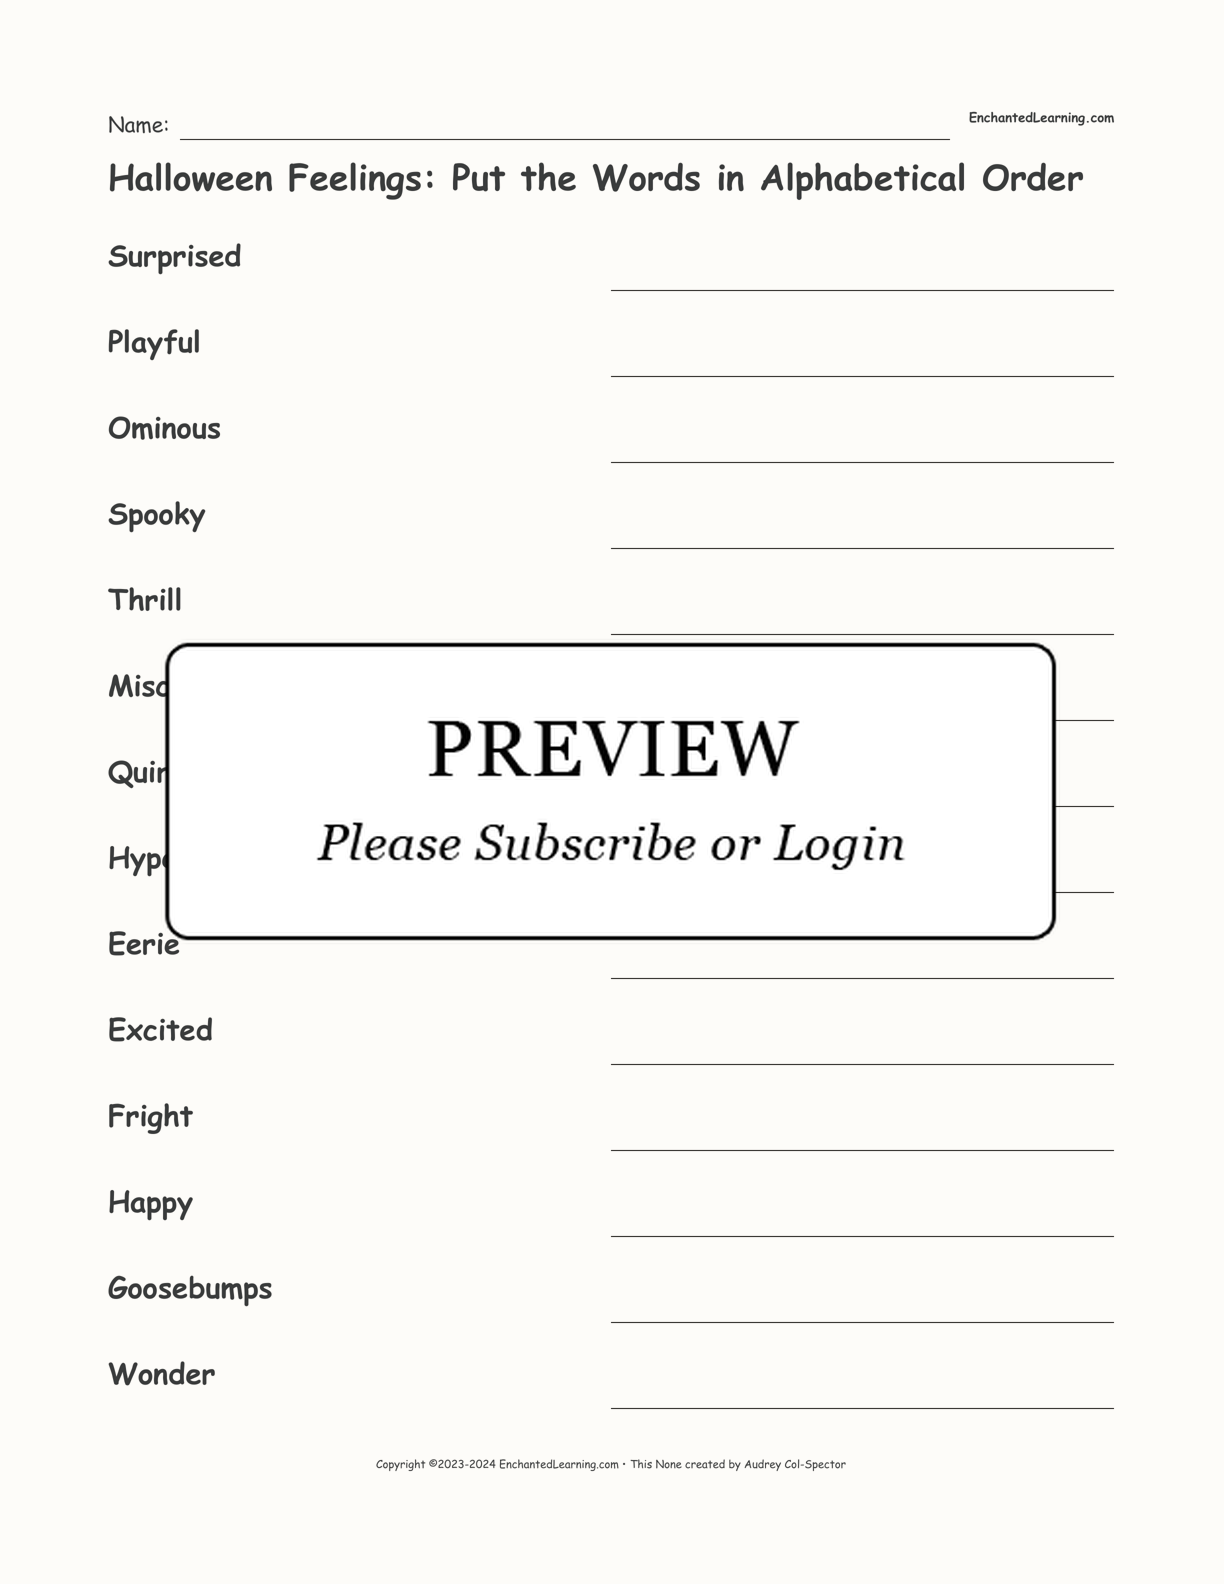 Halloween Feelings: Put the Words in Alphabetical Order interactive worksheet page 1